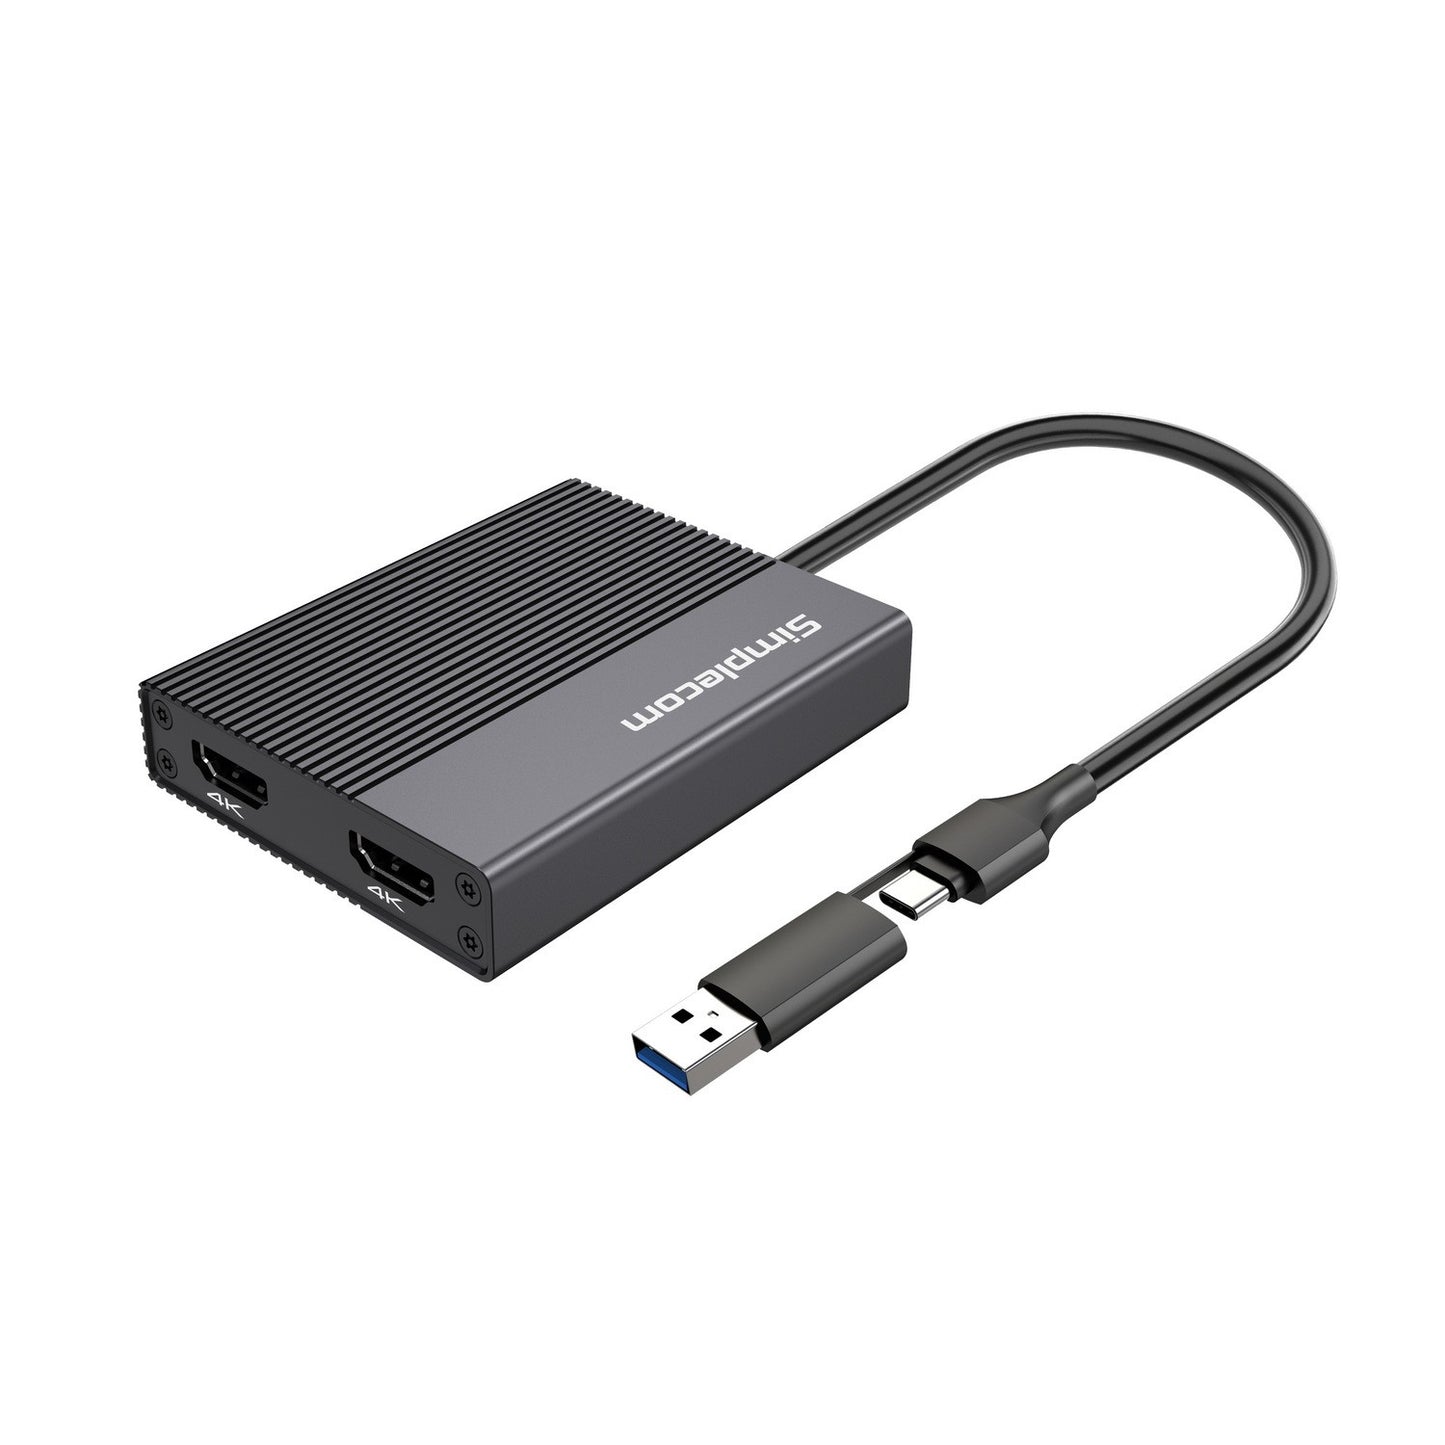 USB 3.0 or USB-C to Dual 4K HDMI Display Adapter